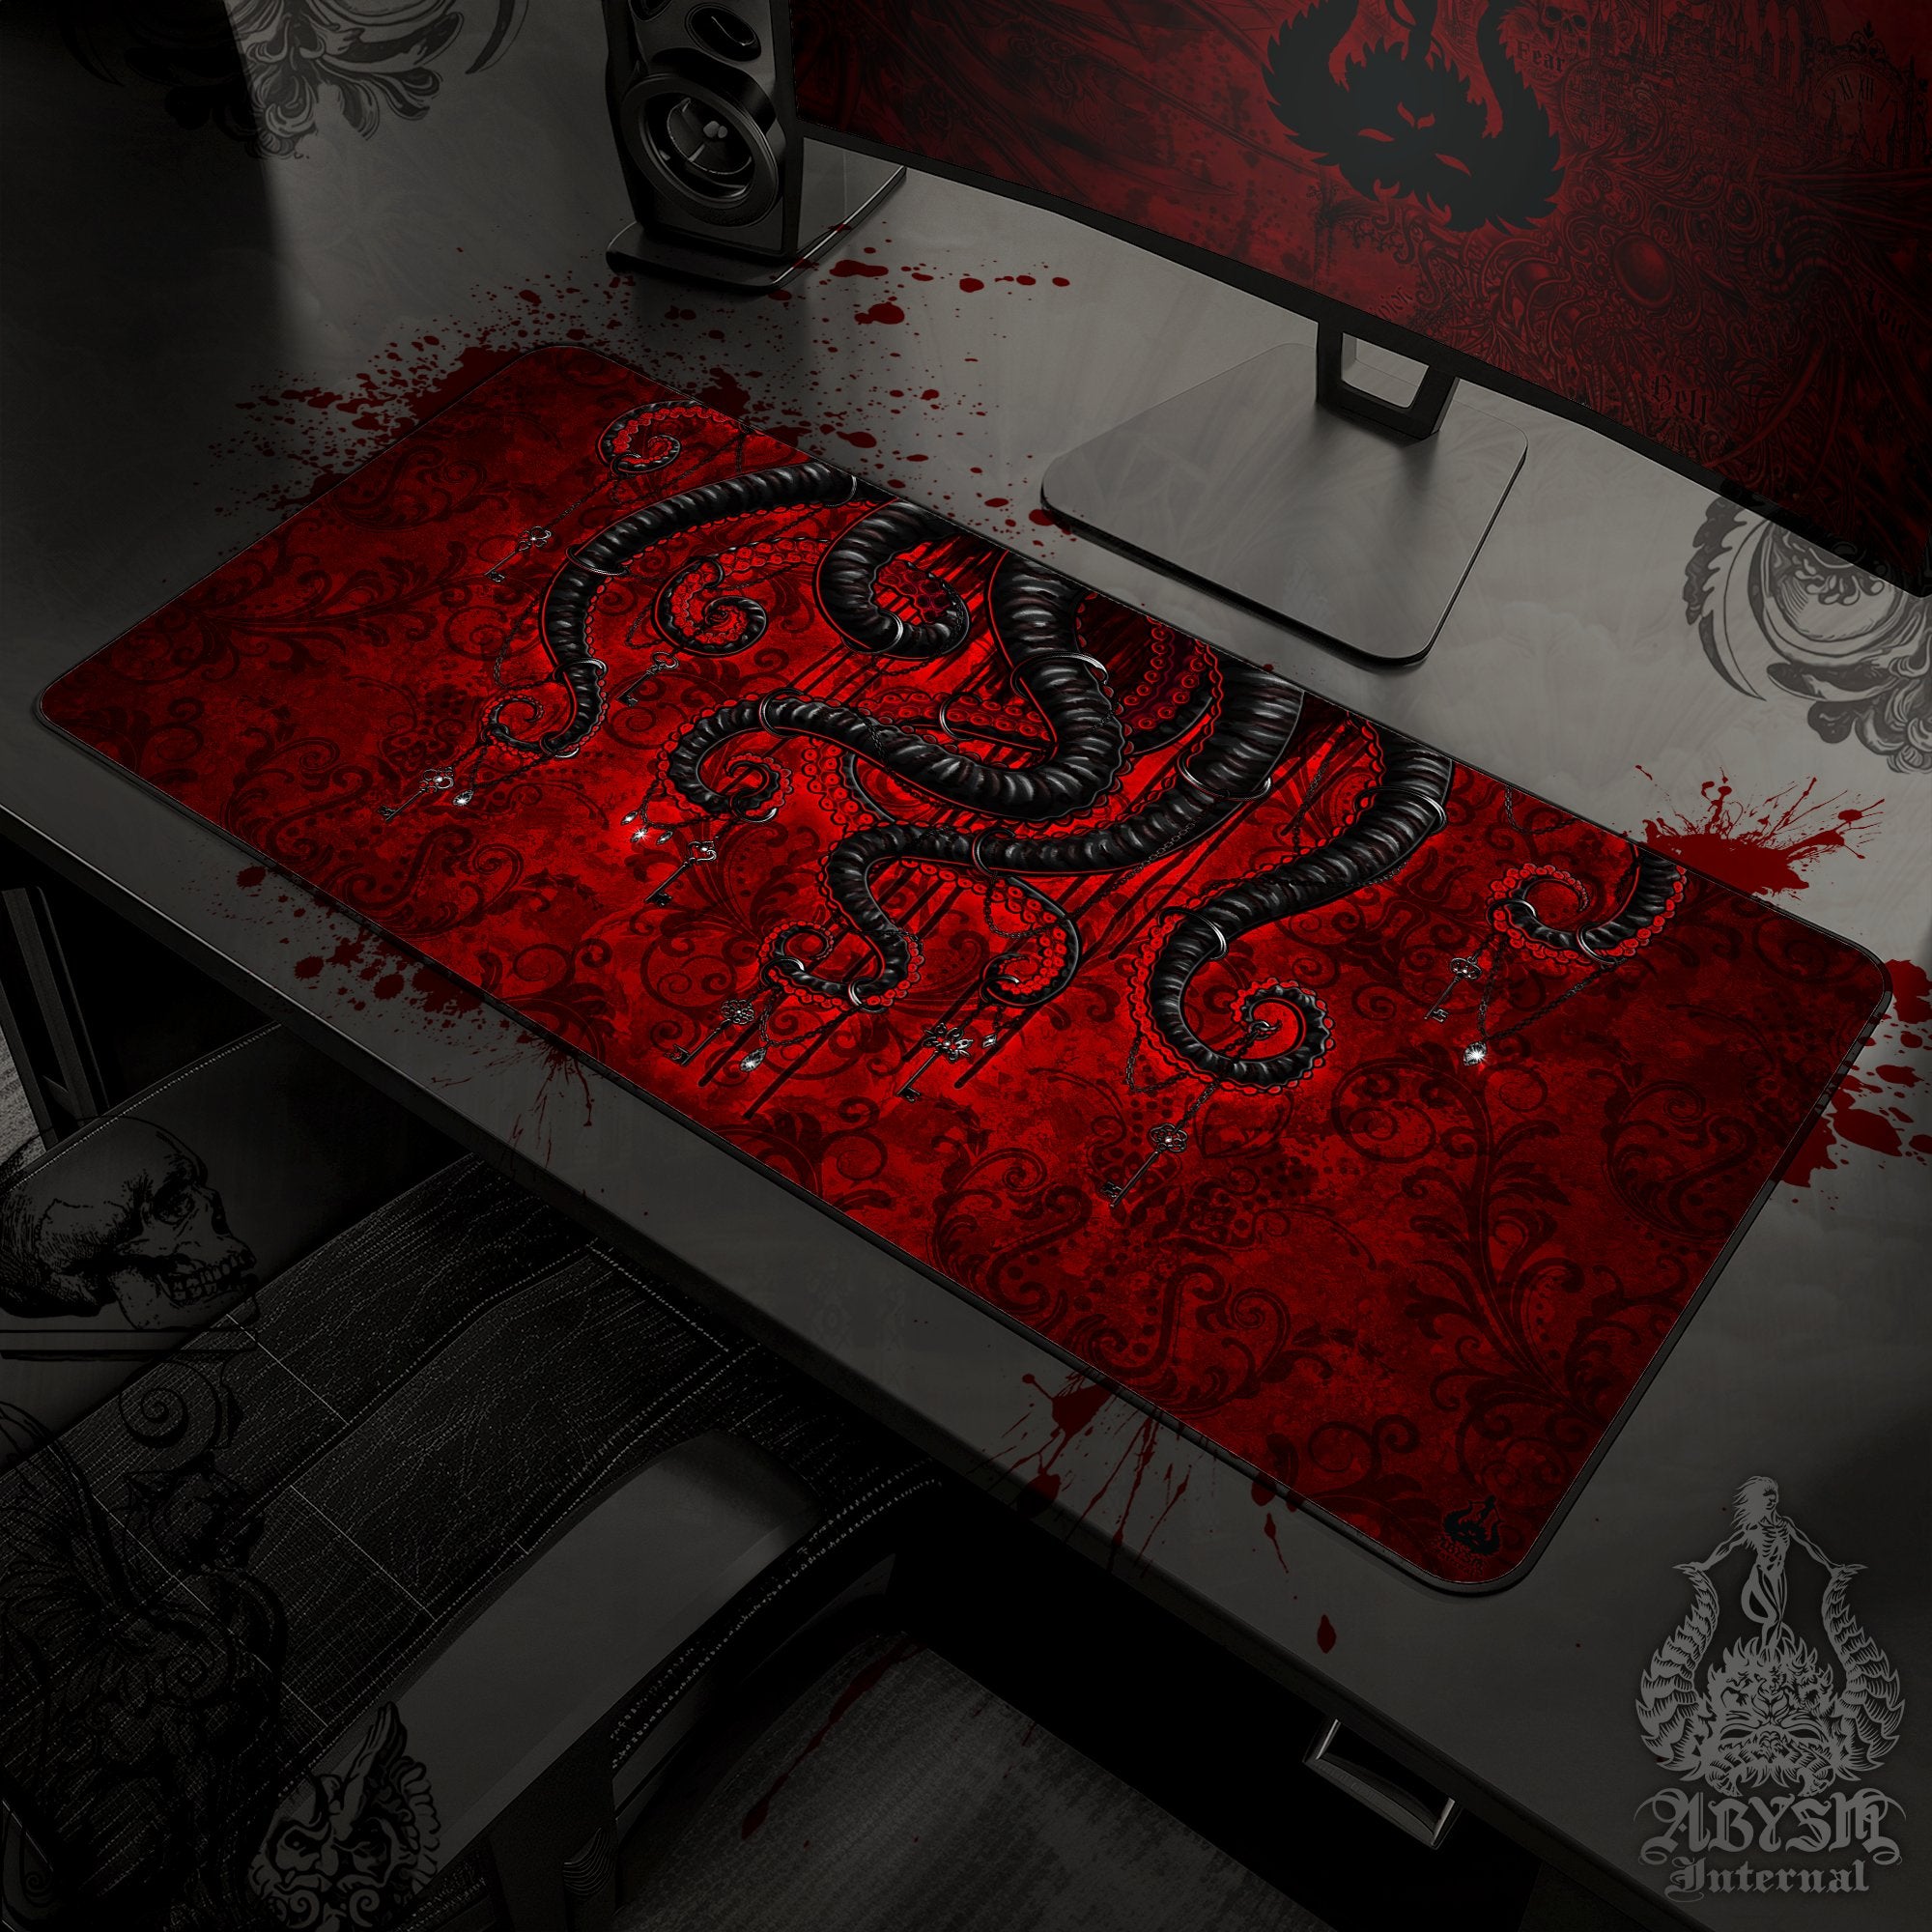 Gothic Gaming Mouse Pad, Octopus Desk Mat, Bloody Goth Table Protector Cover, Black Tentacles Workpad, Fantasy Art Print - Red - Abysm Internal